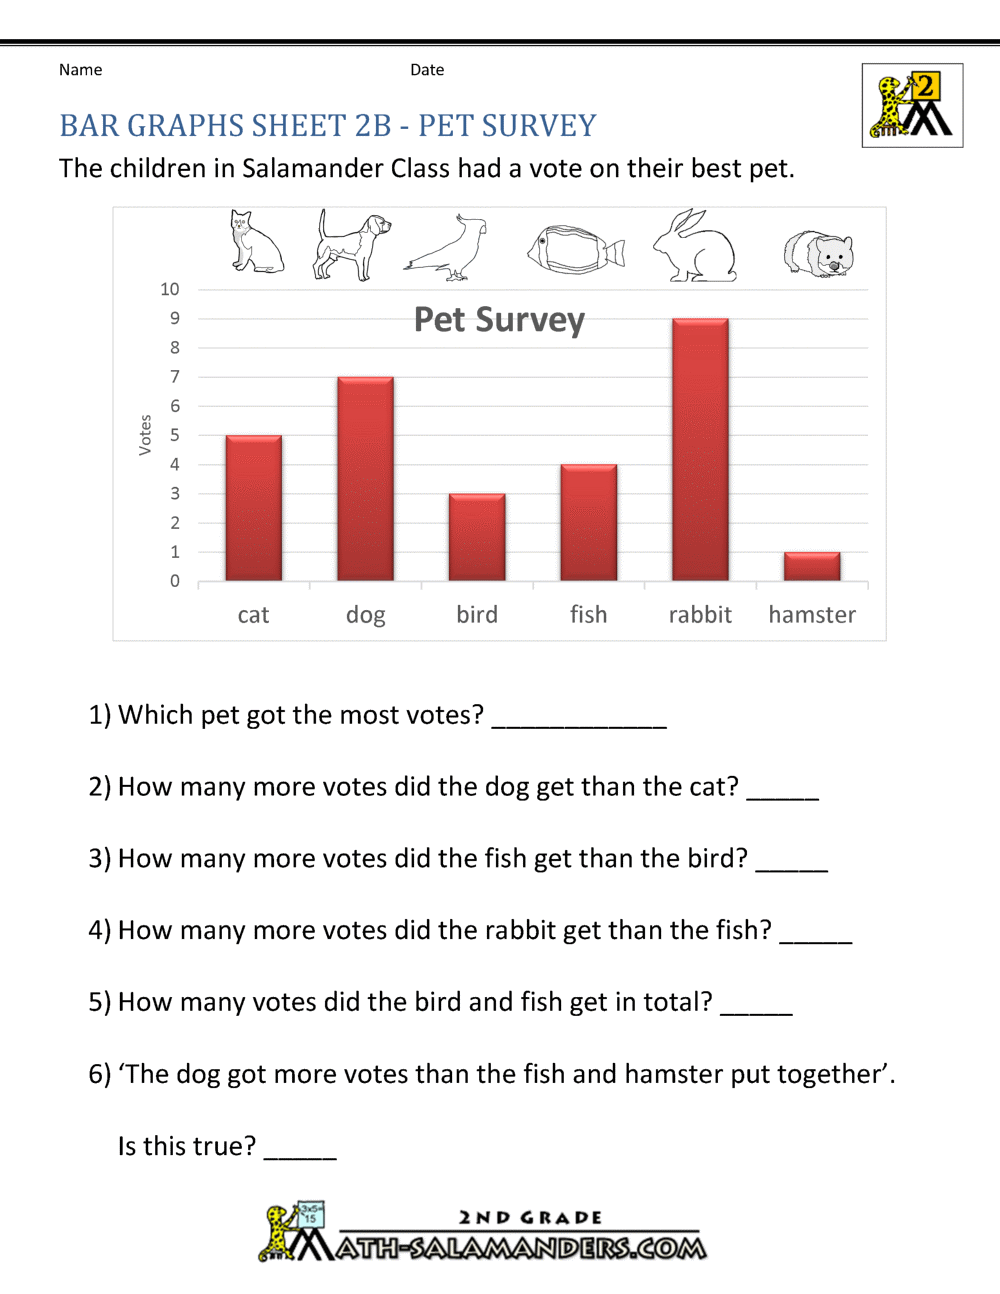 bar-graphs-for-second-grade-worksheets-search-results-calendar-2015